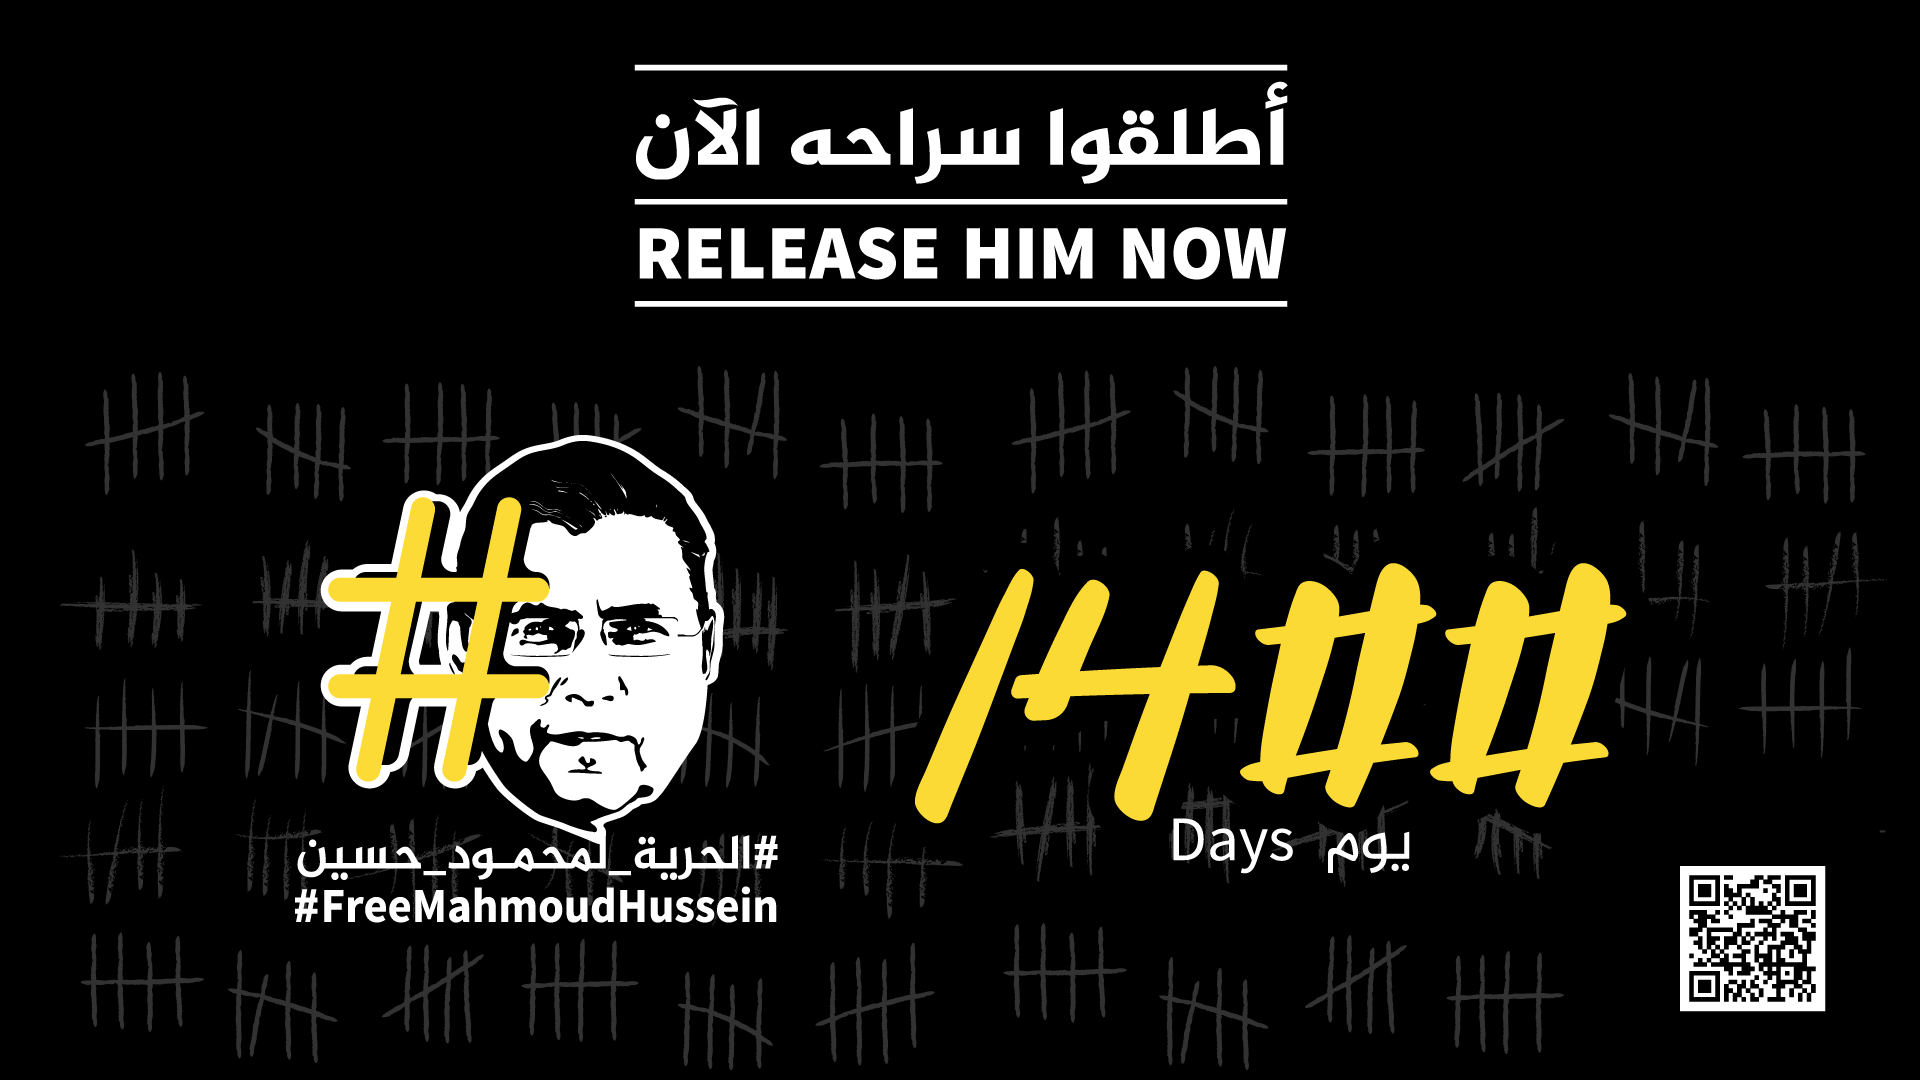 1,400 days in prison for being a journalist: Al Jazeera makes renewed plea for Egypt to release Mahmoud Hussein